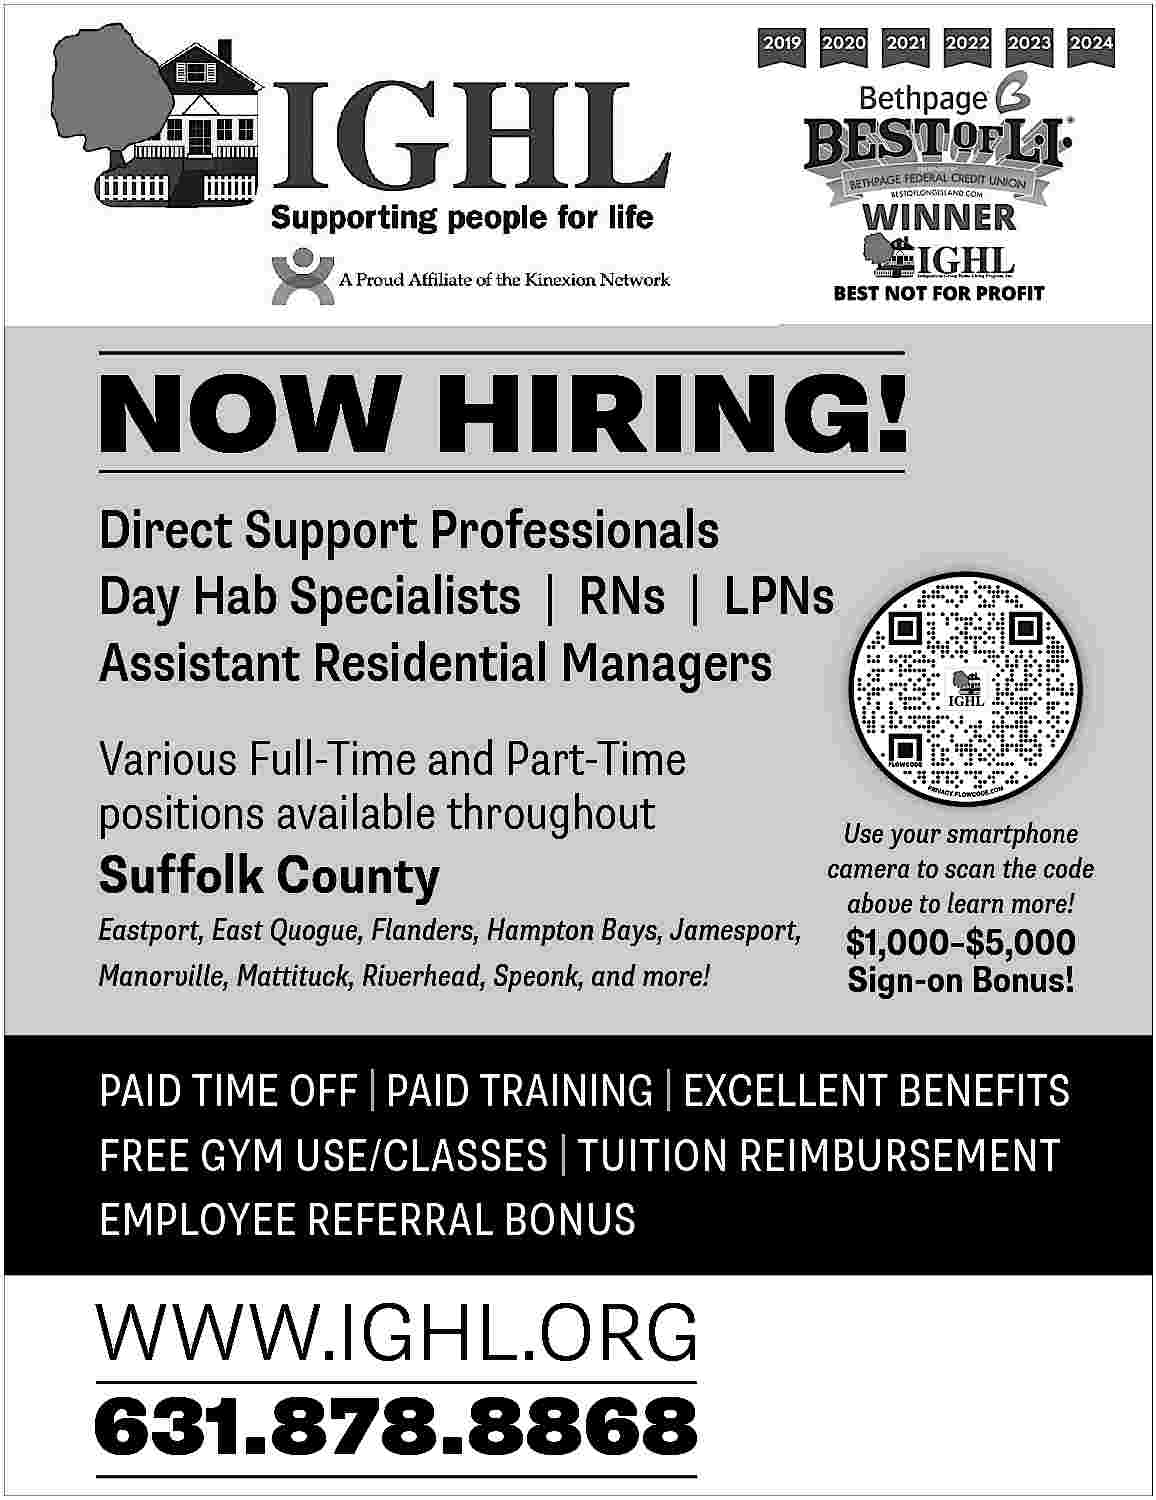 NOW HIRING! <br>Direct Support Professionals  NOW HIRING!  Direct Support Professionals  Day Hab Specialists | RNs | LPNs  Assistant Residential Managers  Various Full-Time and Part-Time  positions available throughout    Suffolk County    Eastport, East Quogue, Flanders, Hampton Bays, Jamesport,  Manorville, Mattituck, Riverhead, Speonk, and more!    Use your smartphone  camera to scan the code  above to learn more!    $1,000   $5,000  Sign-on Bonus!    PAID TIME OFF | PAID TRAINING | EXCELLENT BENEFITS  FREE GYM USE/CLASSES | TUITION REIMBURSEMENT  EMPLOYEE REFERRAL BONUS    WWW.IGHL.ORG  631.878.8868     